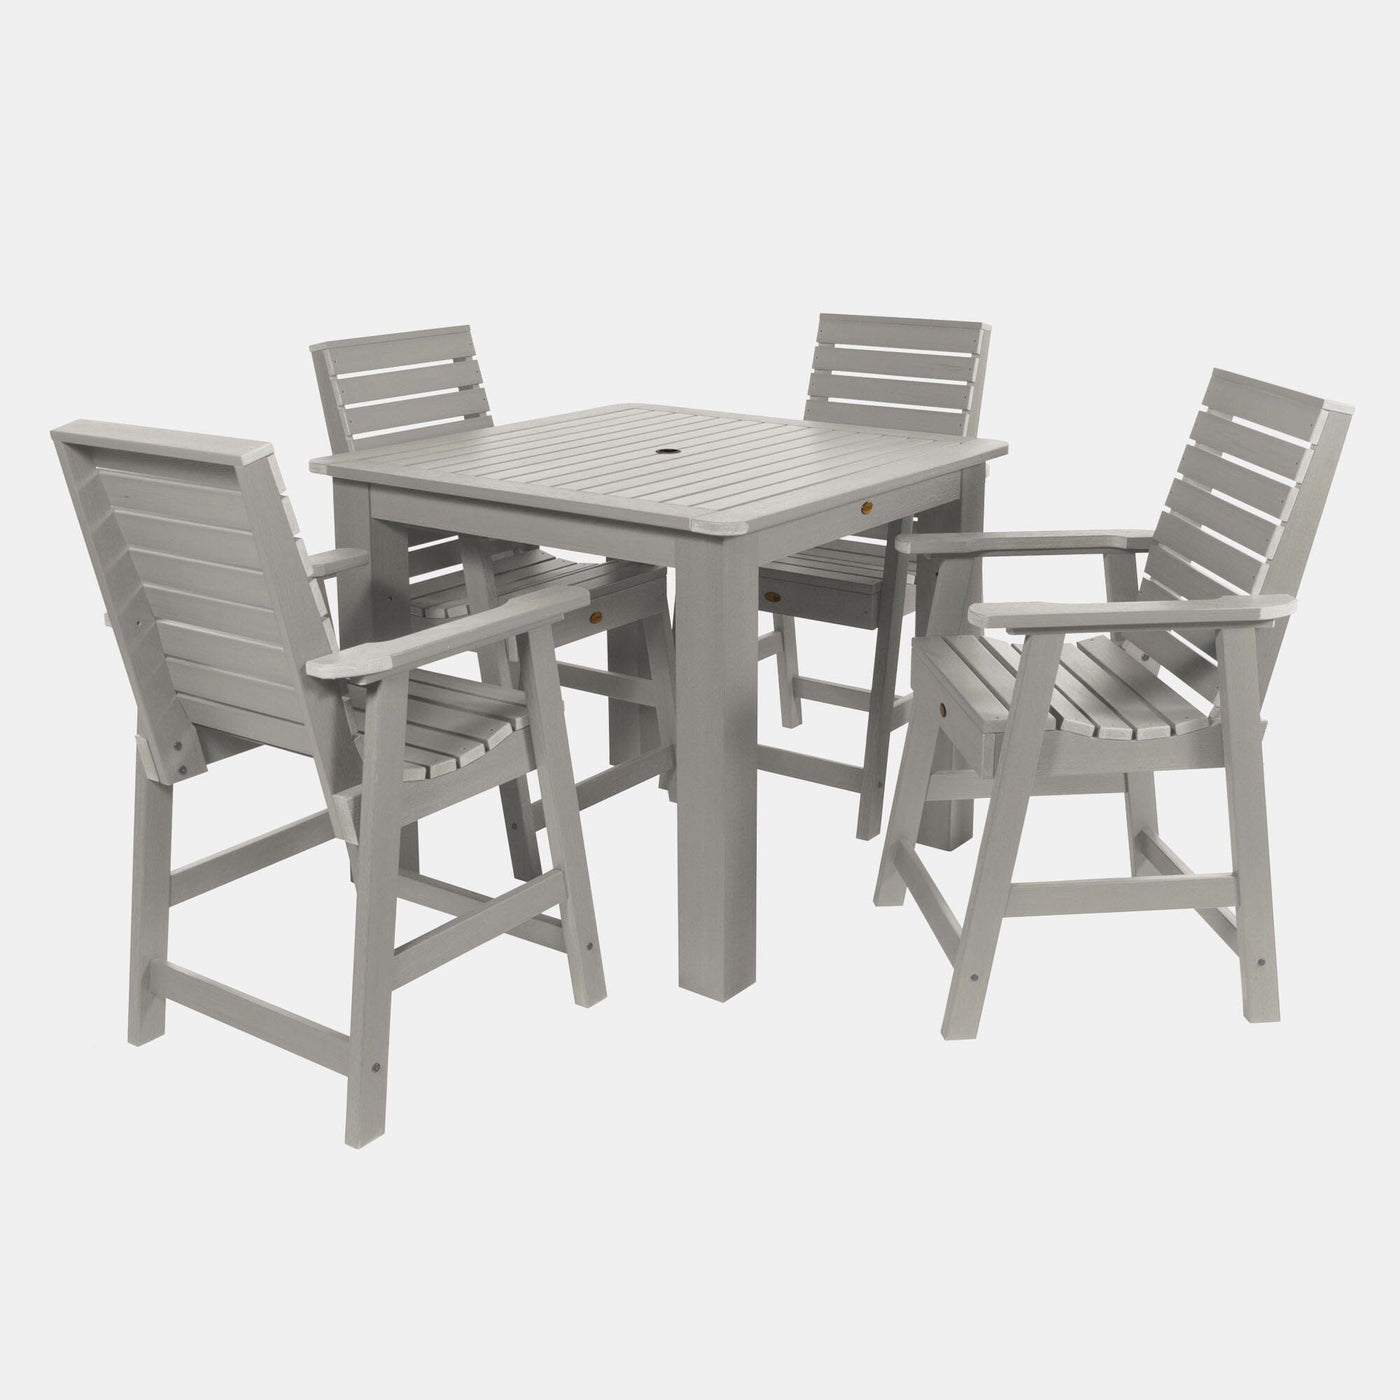 Weatherly 5pc Square Dining Set 42in x 42in- Counter Height Dining Highwood USA Harbor Gray 